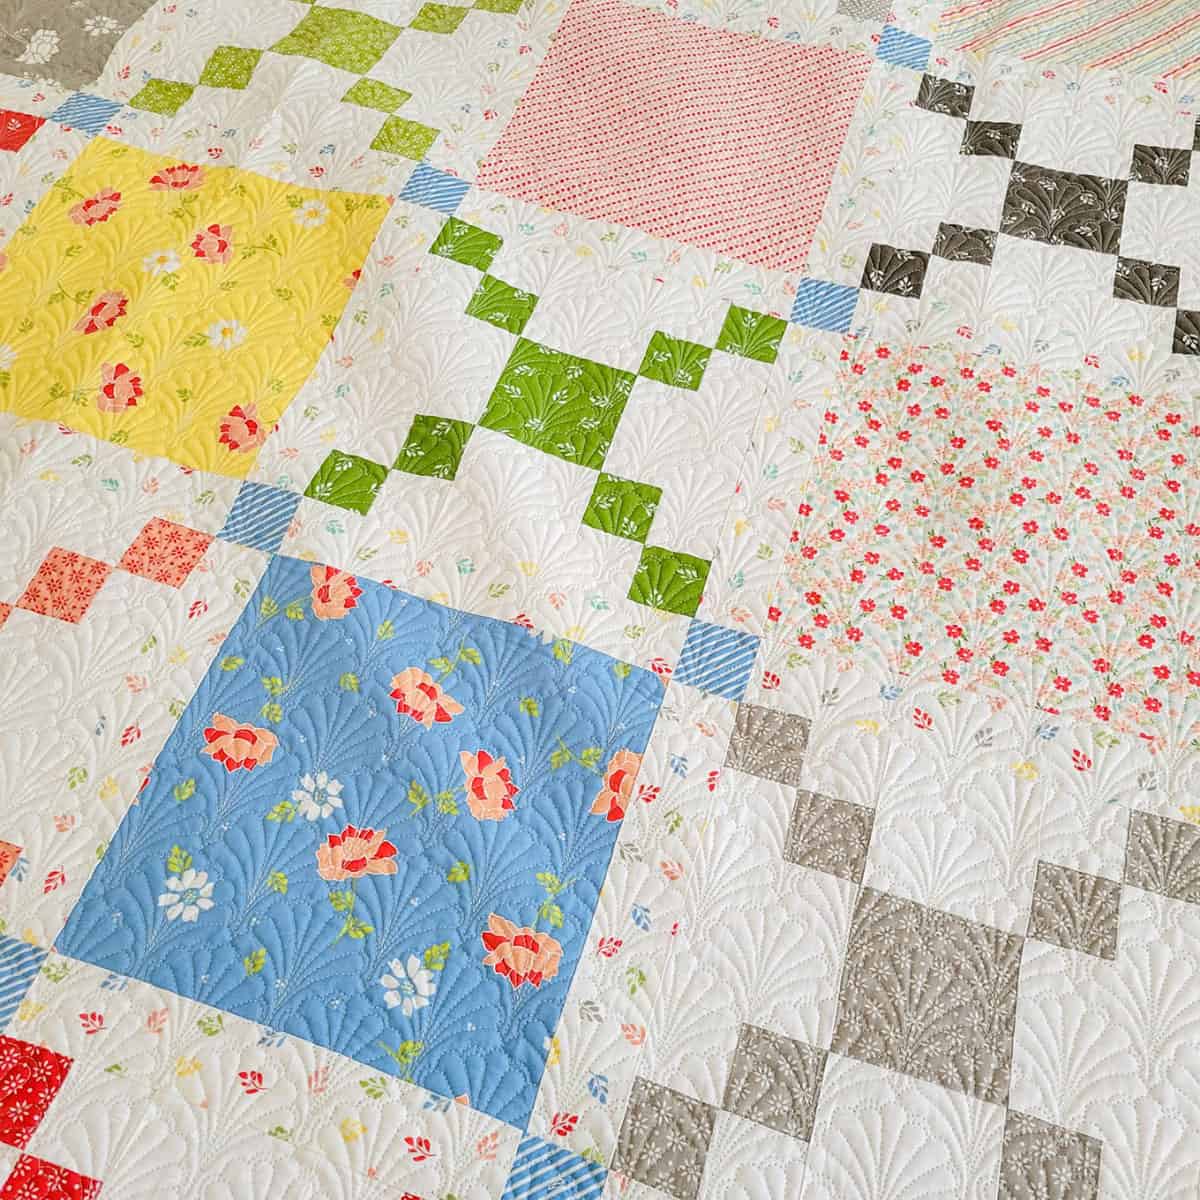 Pot Luck quilt by Sherri from a Quilting Life